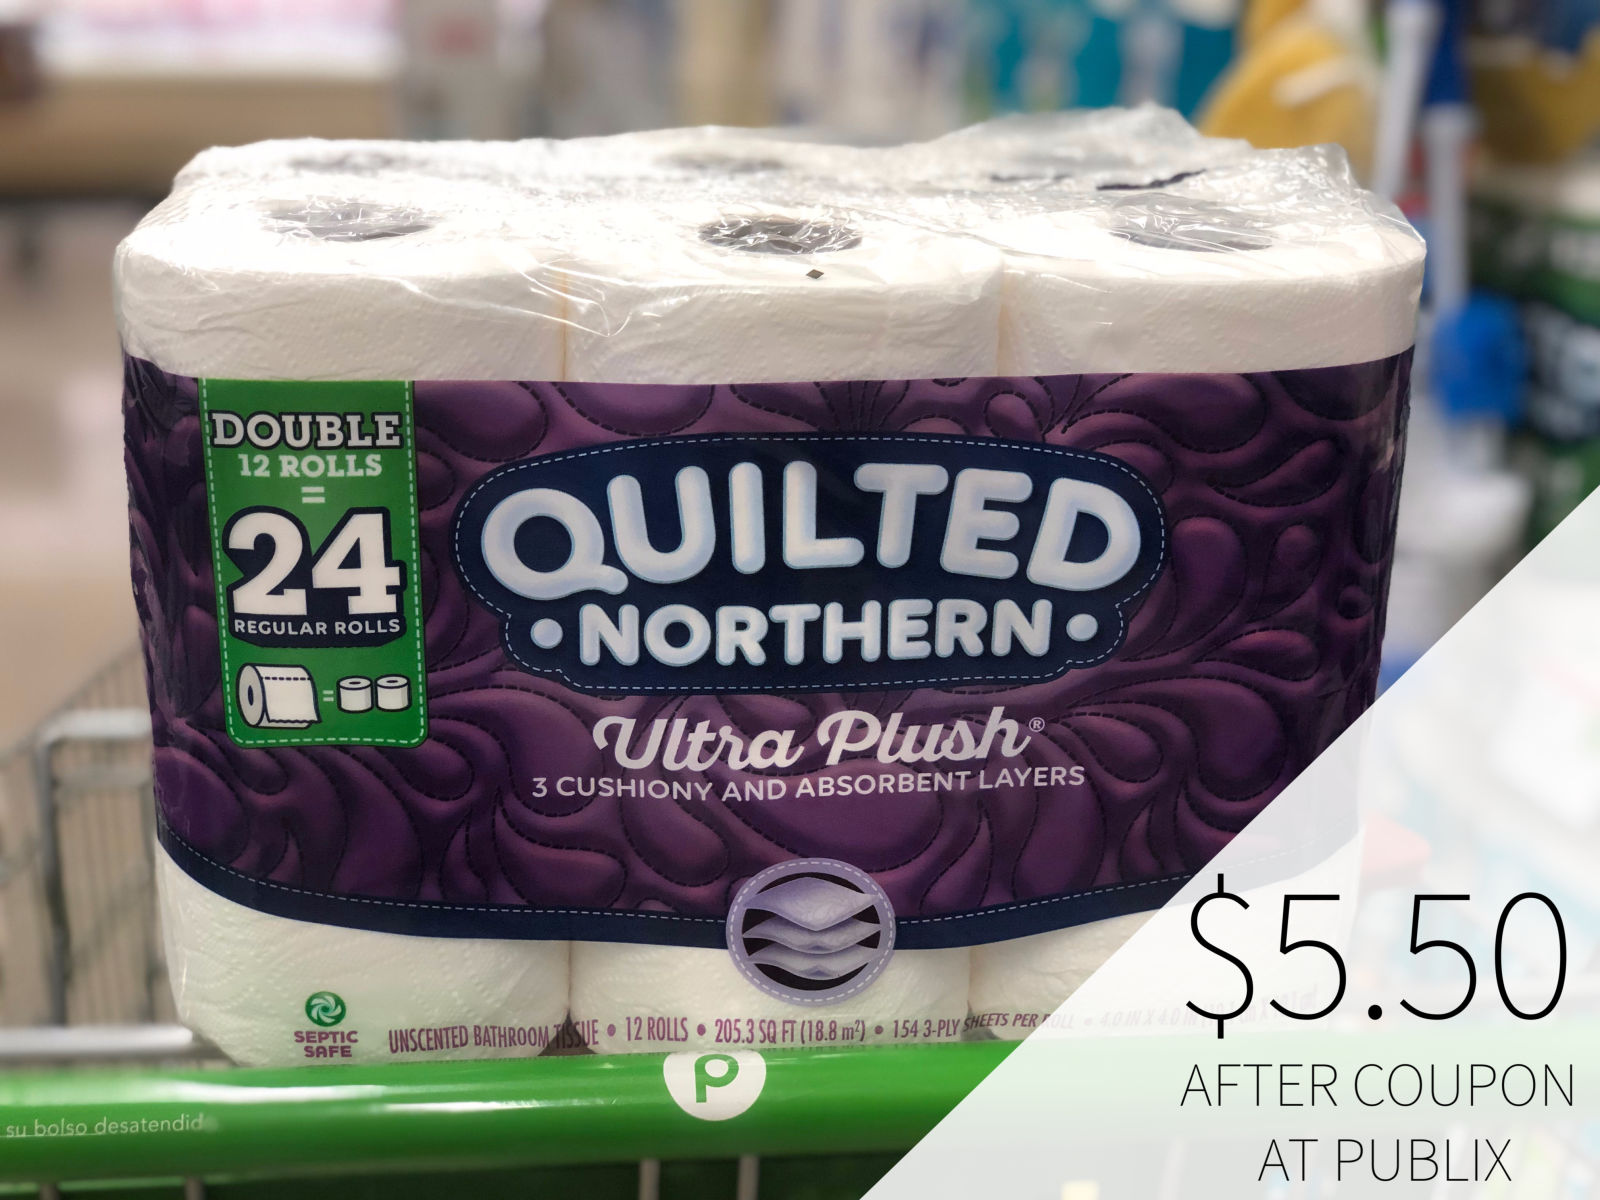 Pick Up A Super Deal On Quilted Northern® Bathroom Tissue At Publix